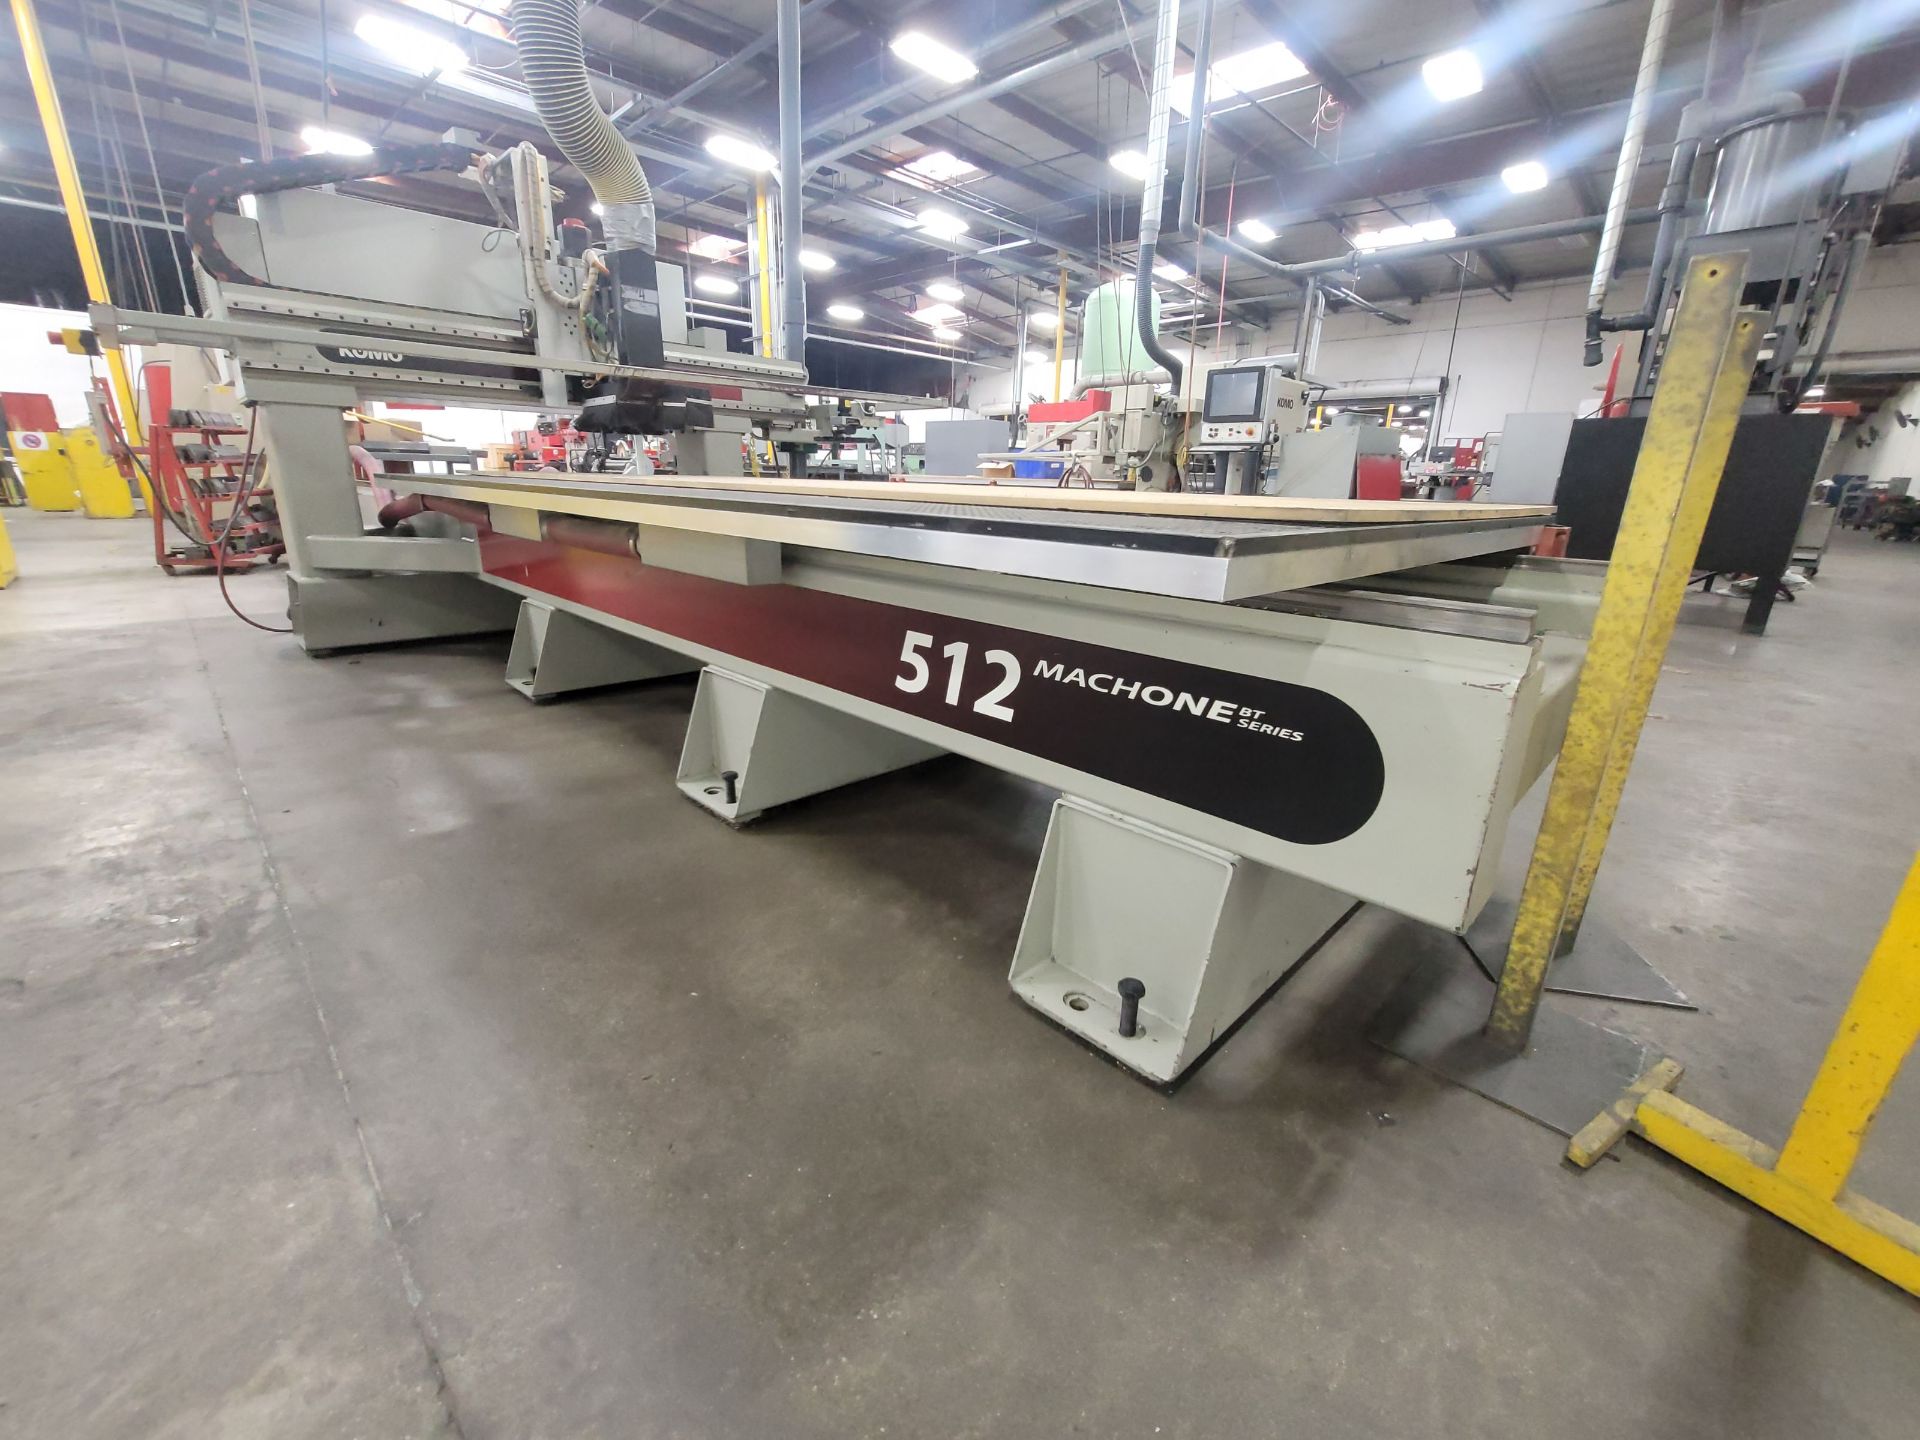 2011 KOMO CNC ROUTER, MODEL MACH ONE BT 512, S/N 01091-10 - Image 6 of 8